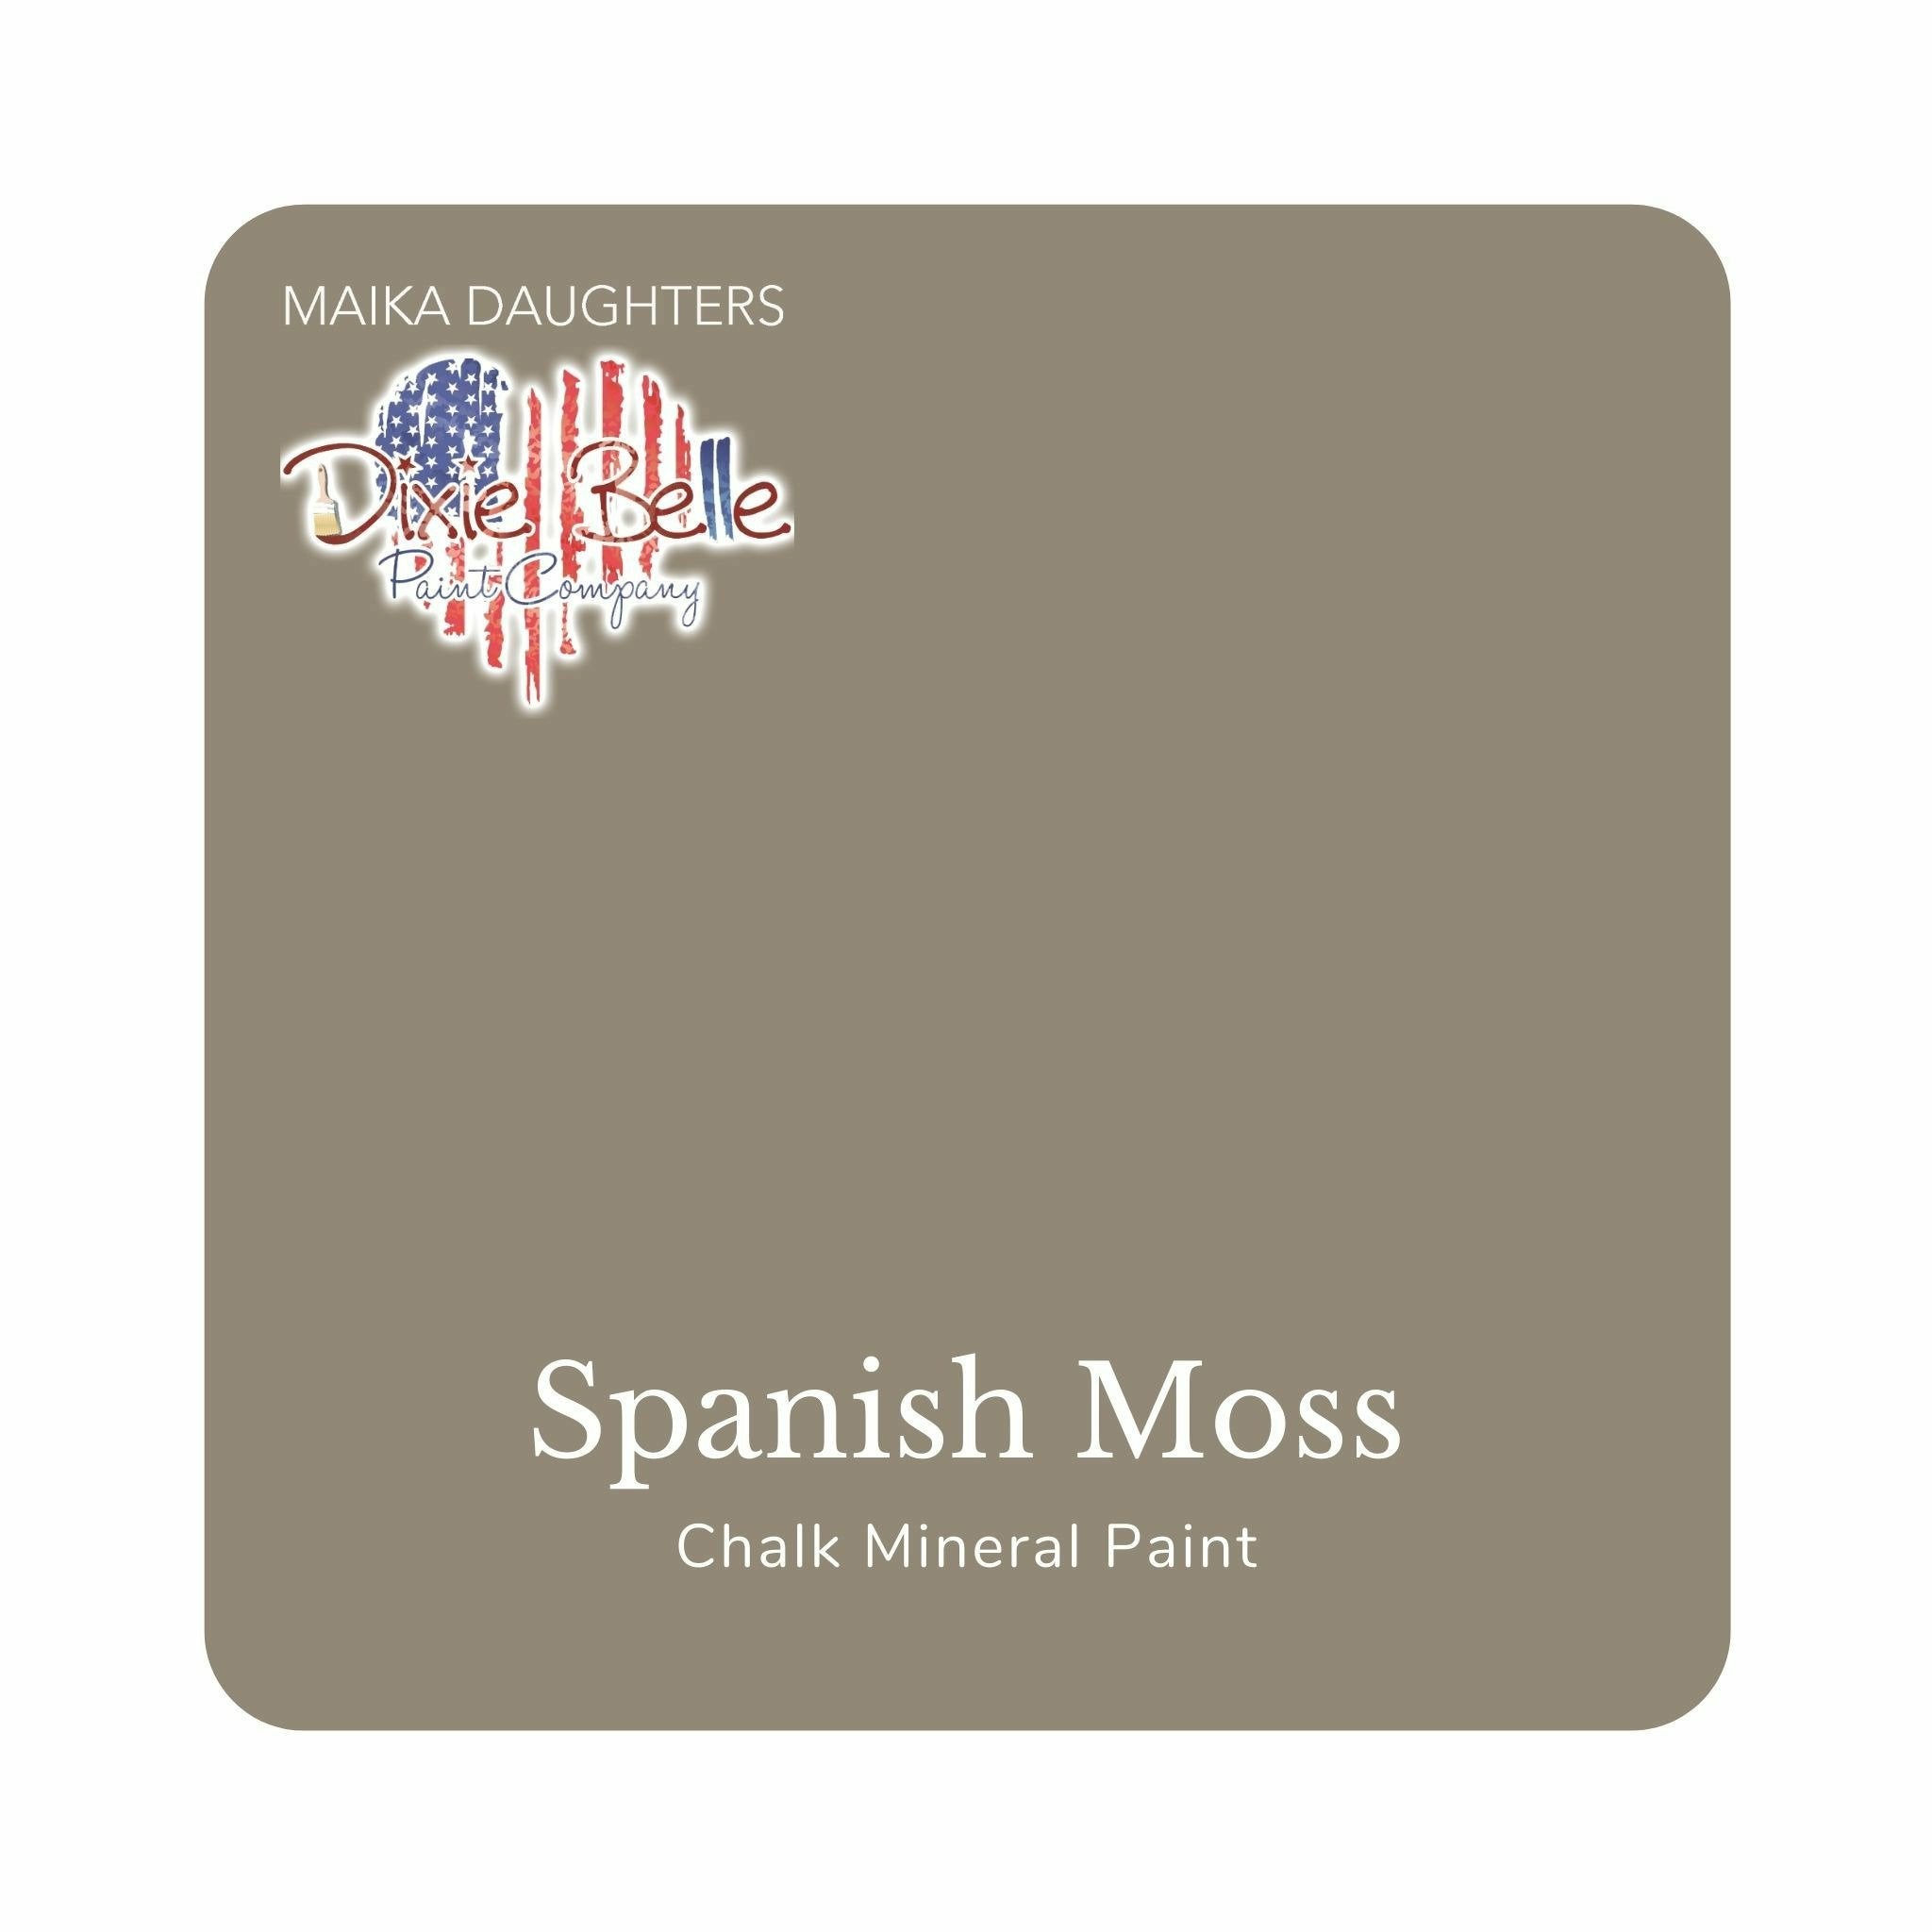 A square swatch card of Dixie Belle Paint Company’s Spanish Moss Chalk Mineral Paint is against a white background. This color is a green and gray mix.